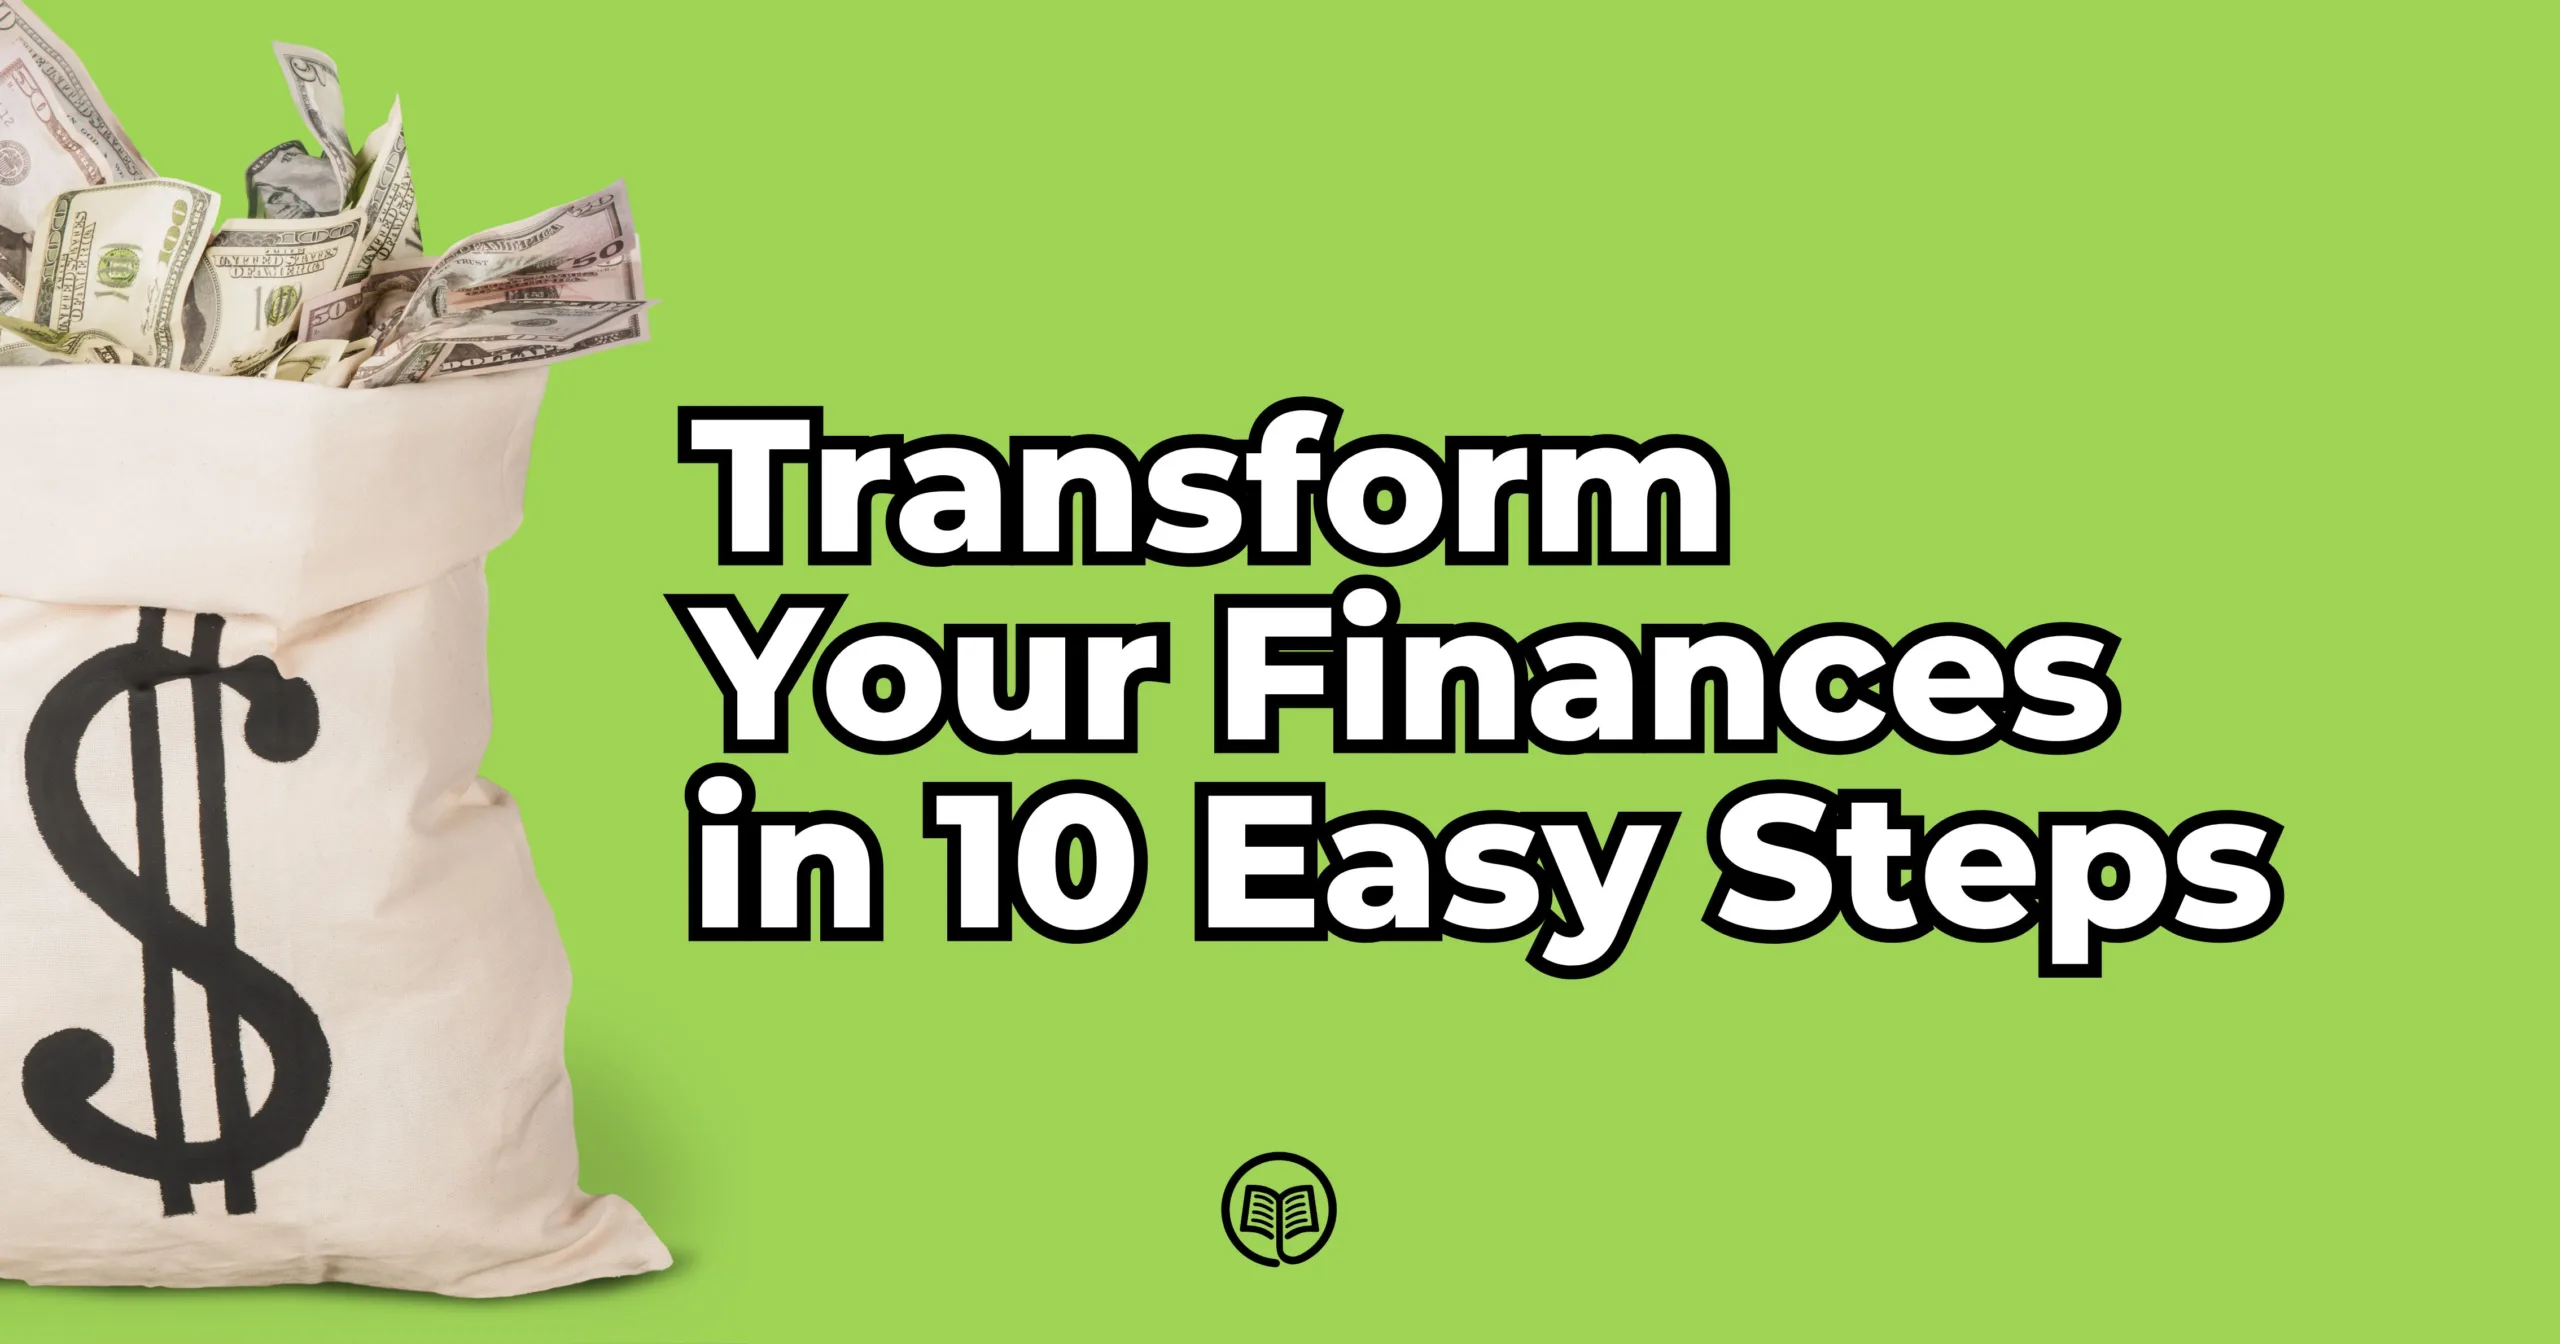 Transform Your Finances in 10 Easy Steps: A Simple Guide to Spending Smarter, Not Harder